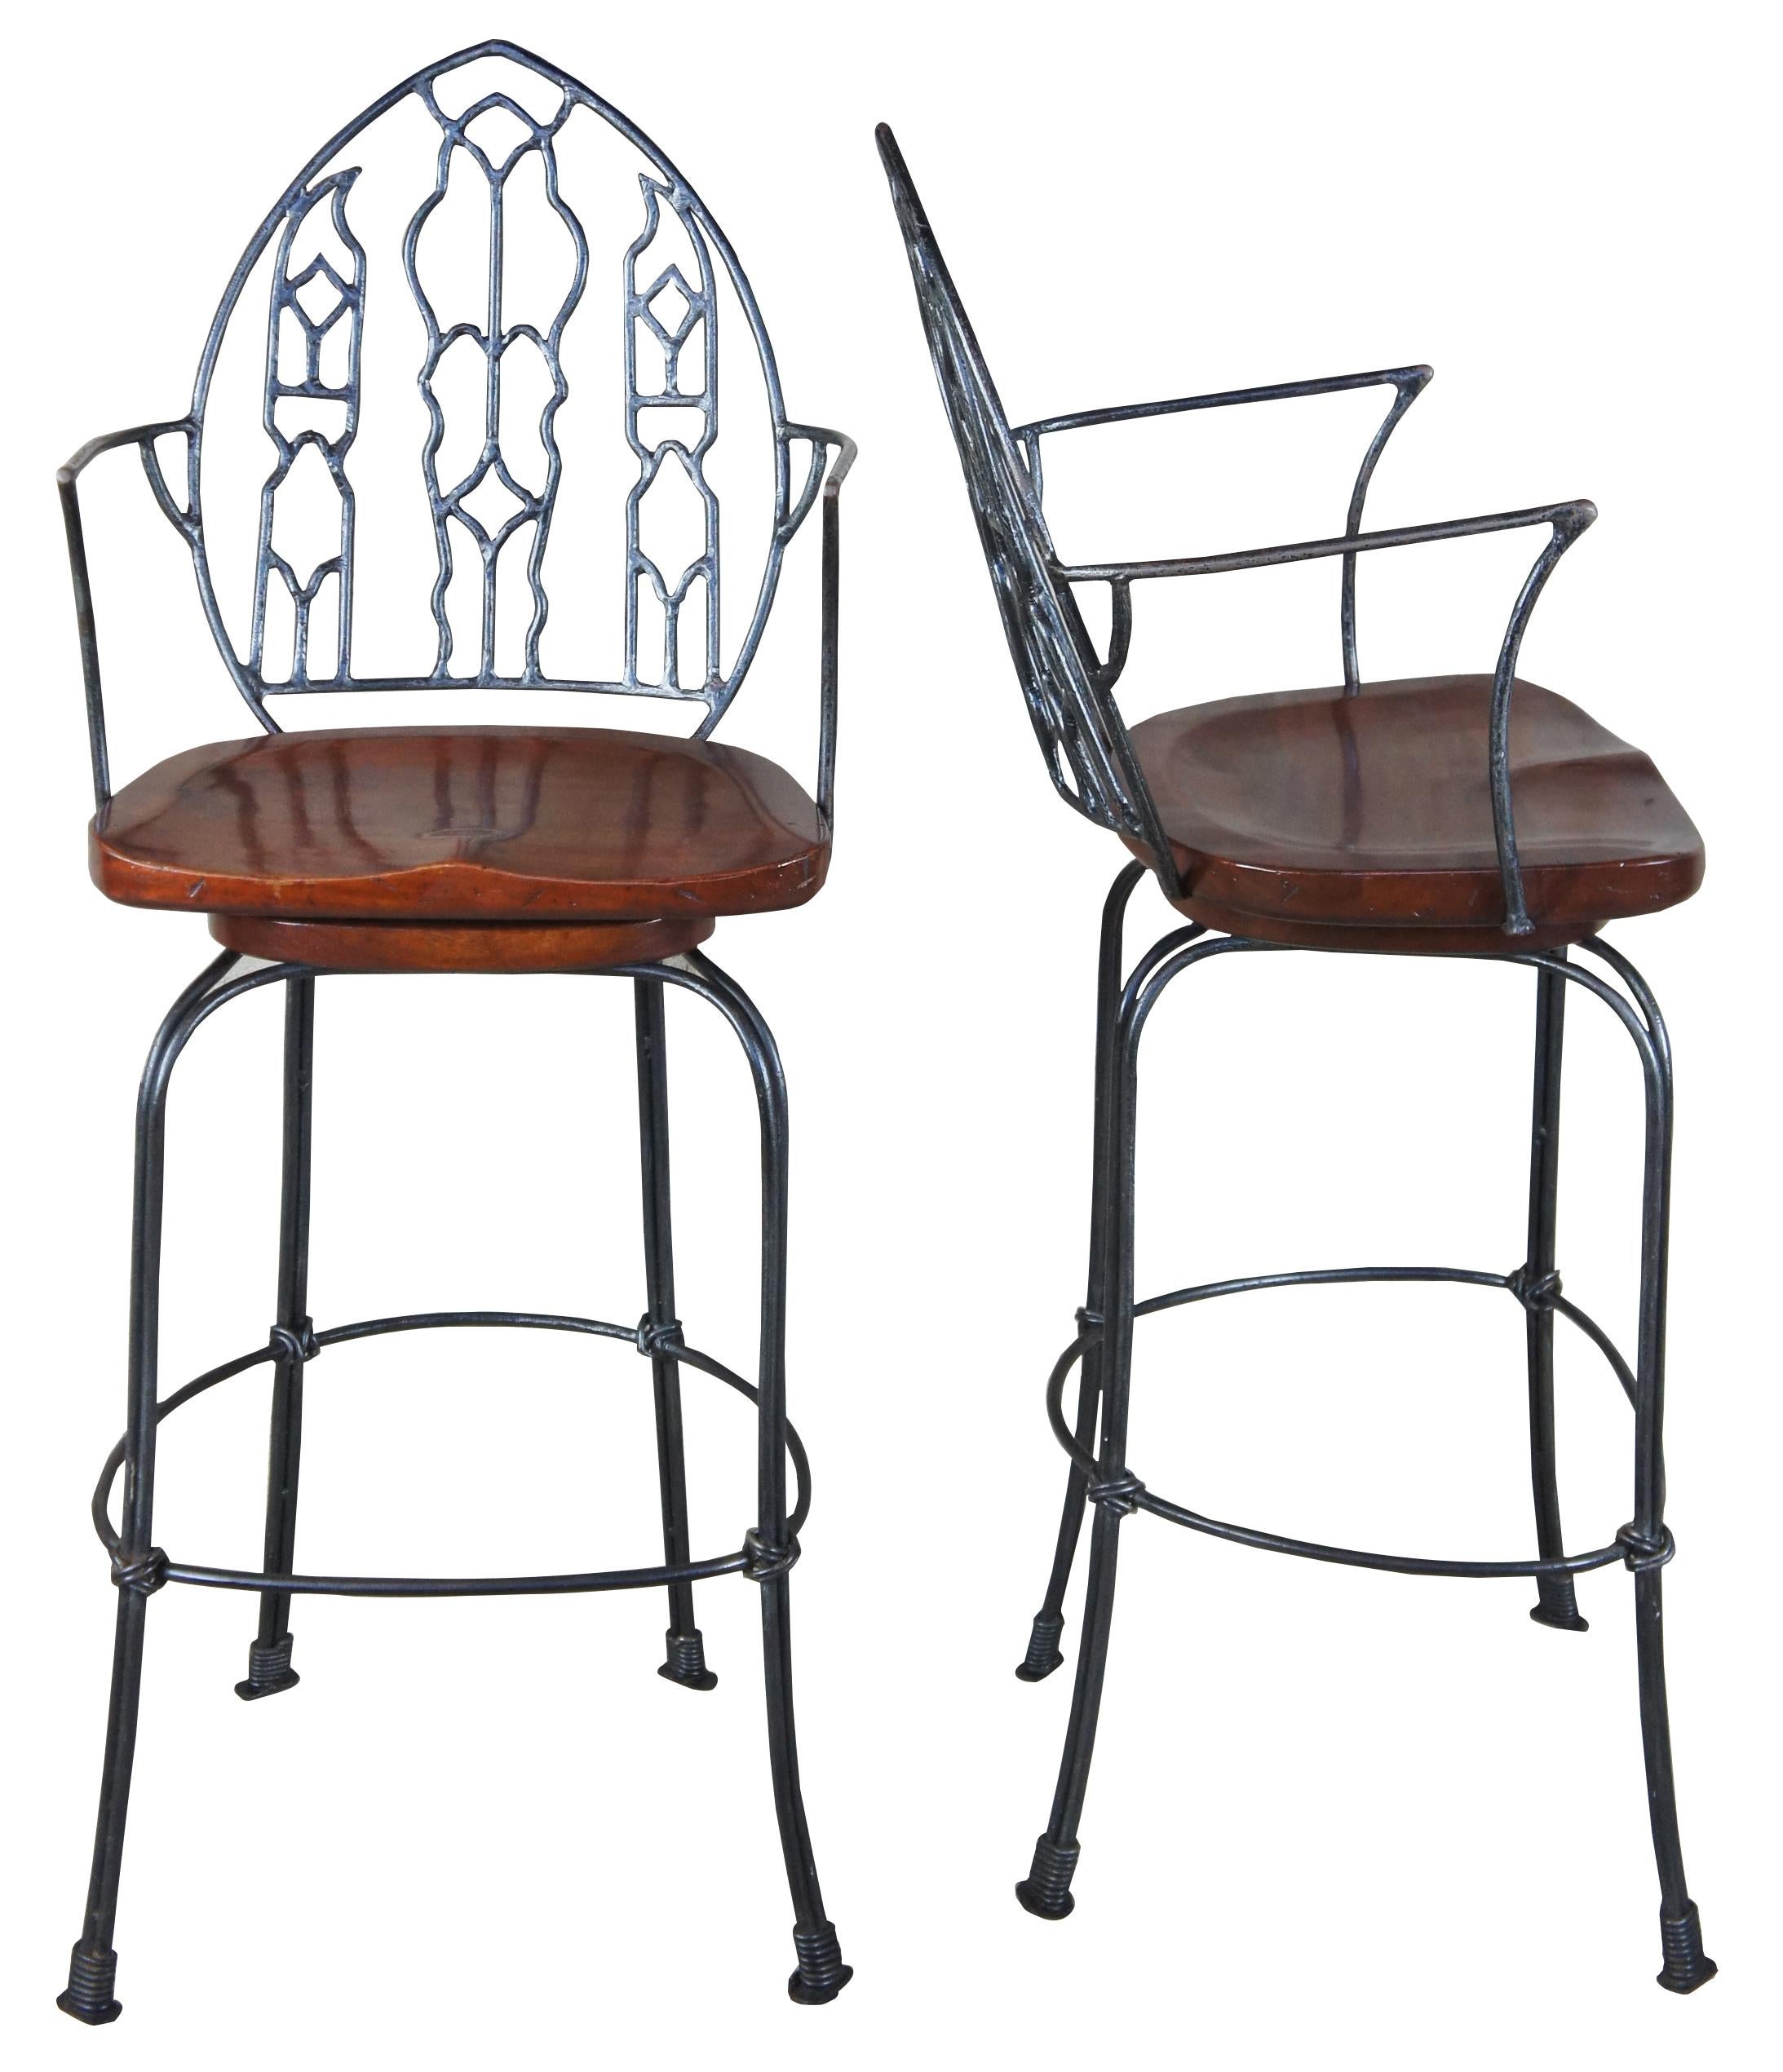 Late 20th century gothic and Spanish inspired wrought iron bar stools with mahogany saddle seat. Stools features swivel action and foot bar. Very heavy.
 